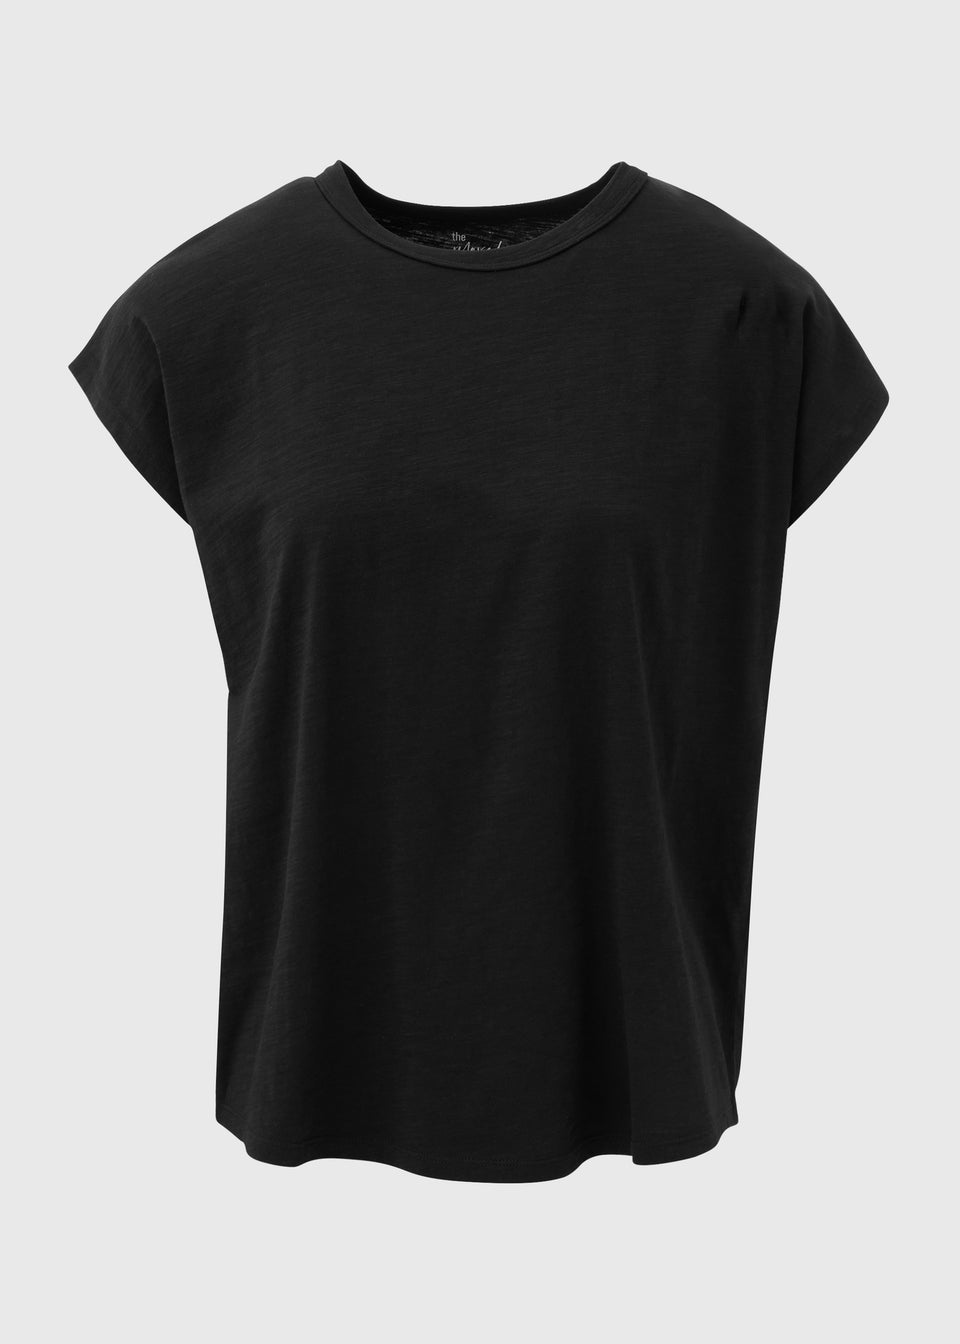 Black Plain Relaxed Fit T-Shirt